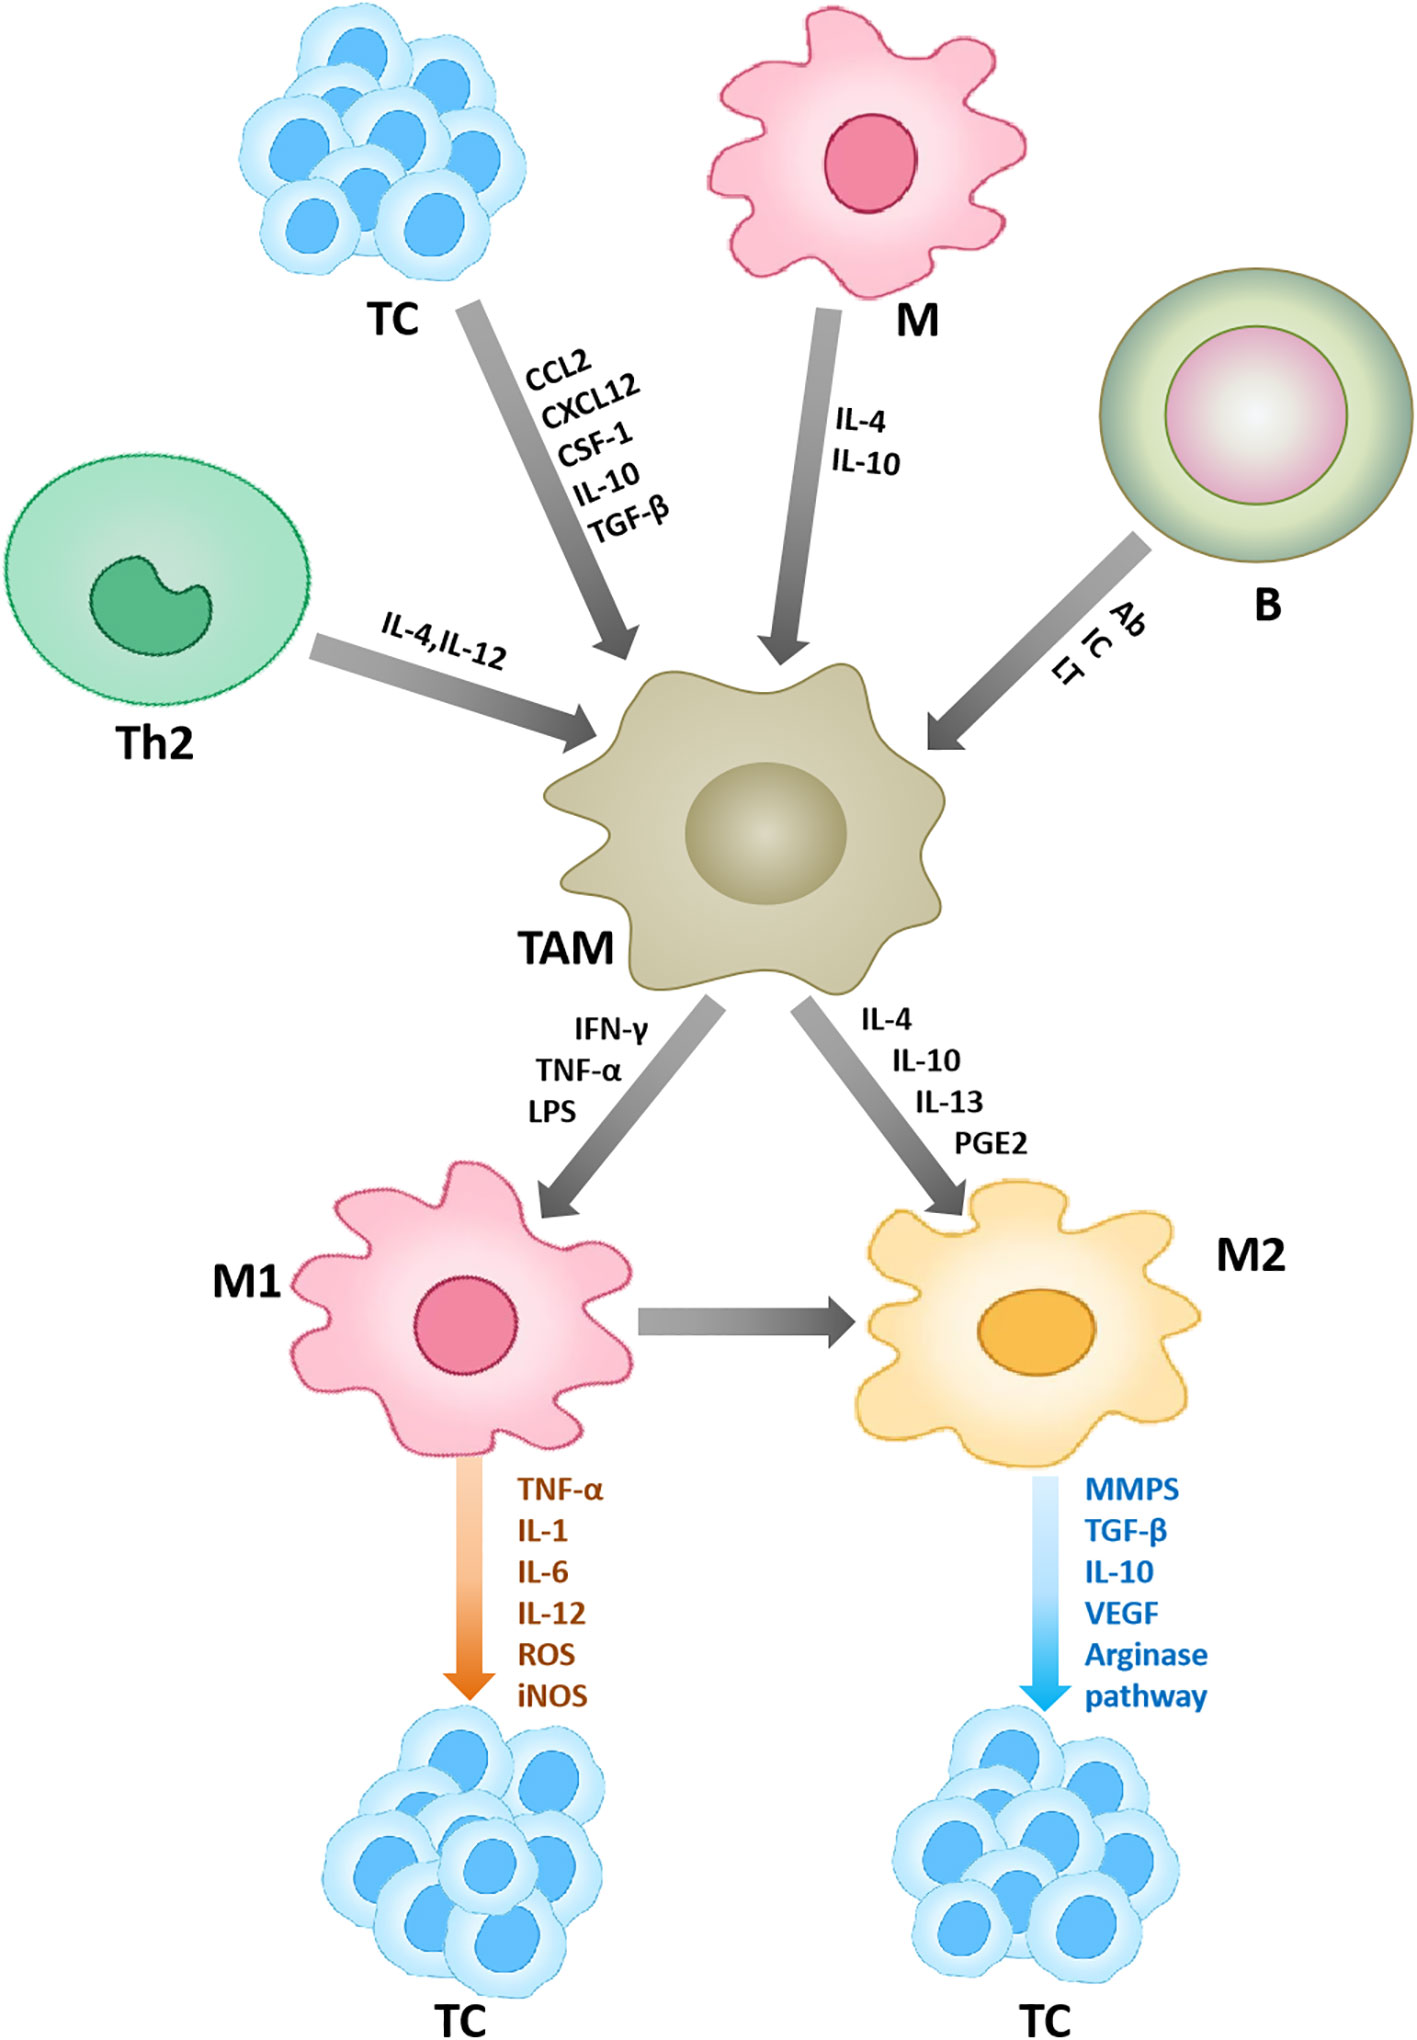 tRNA modifications: insights into their role in human cancers: Trends in  Cell Biology